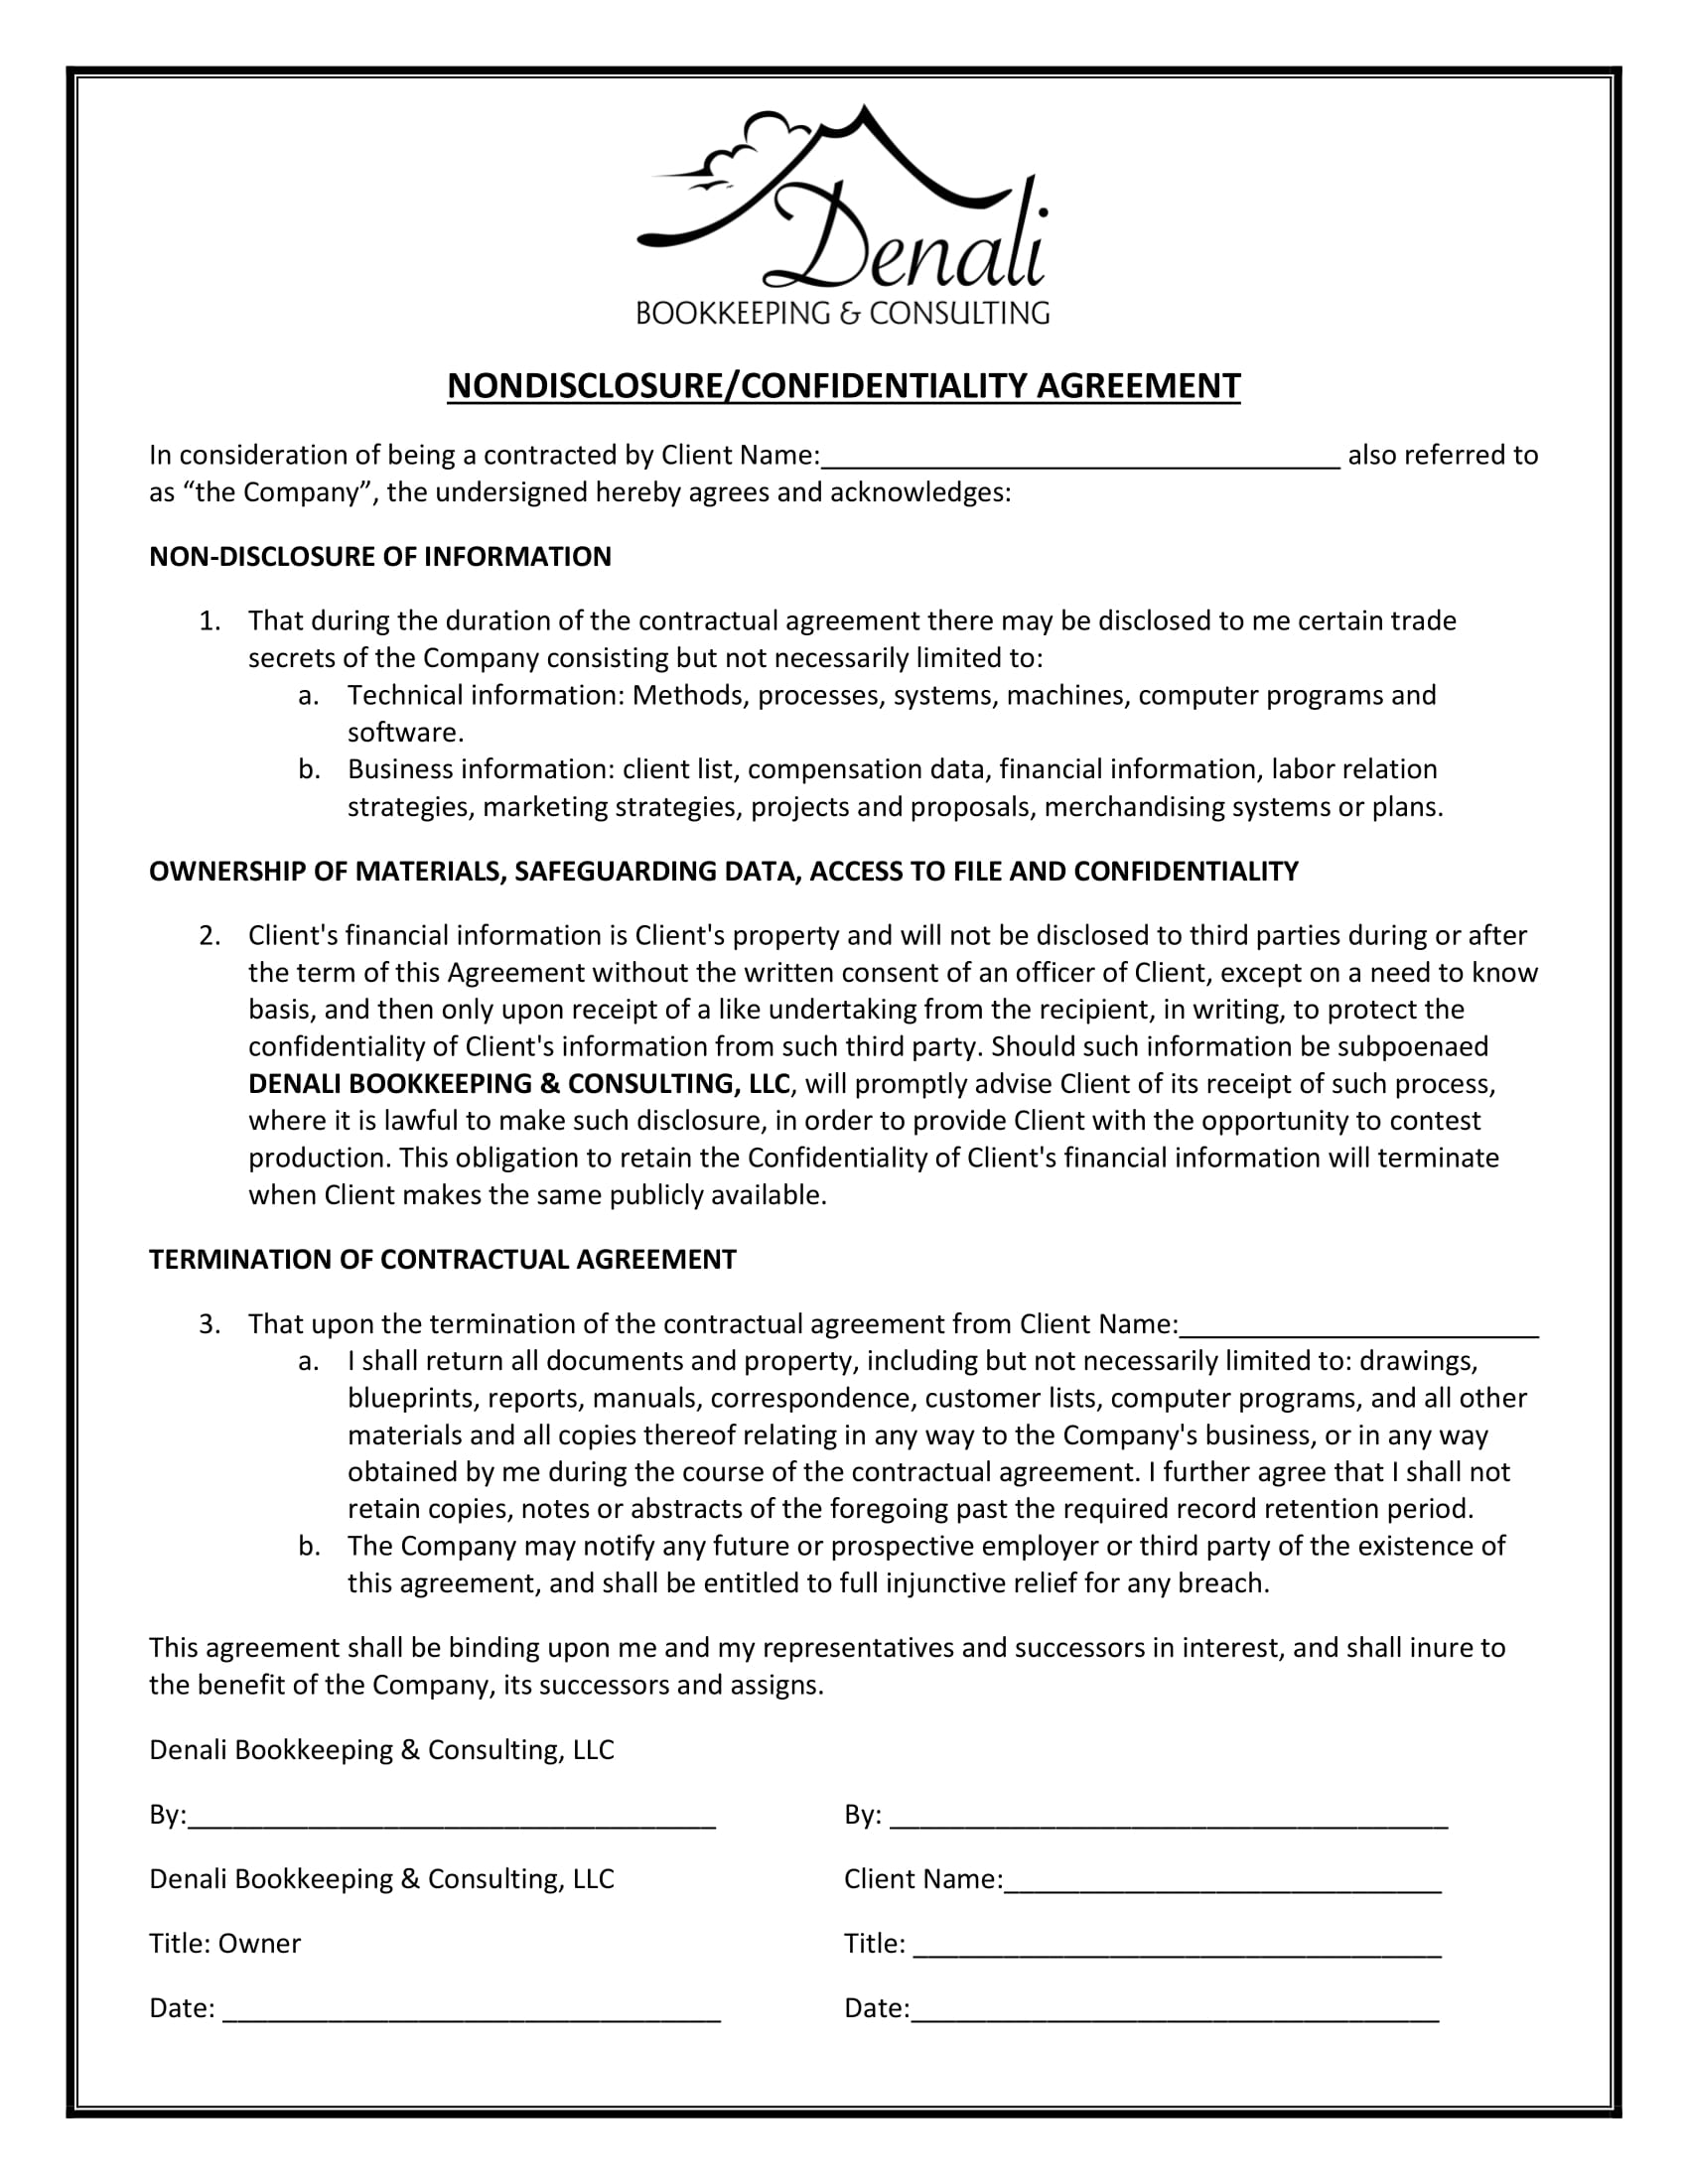 20+ Bookkeeper Confidentiality Agreement Examples - DOC, PDF Within payroll confidentiality agreement template